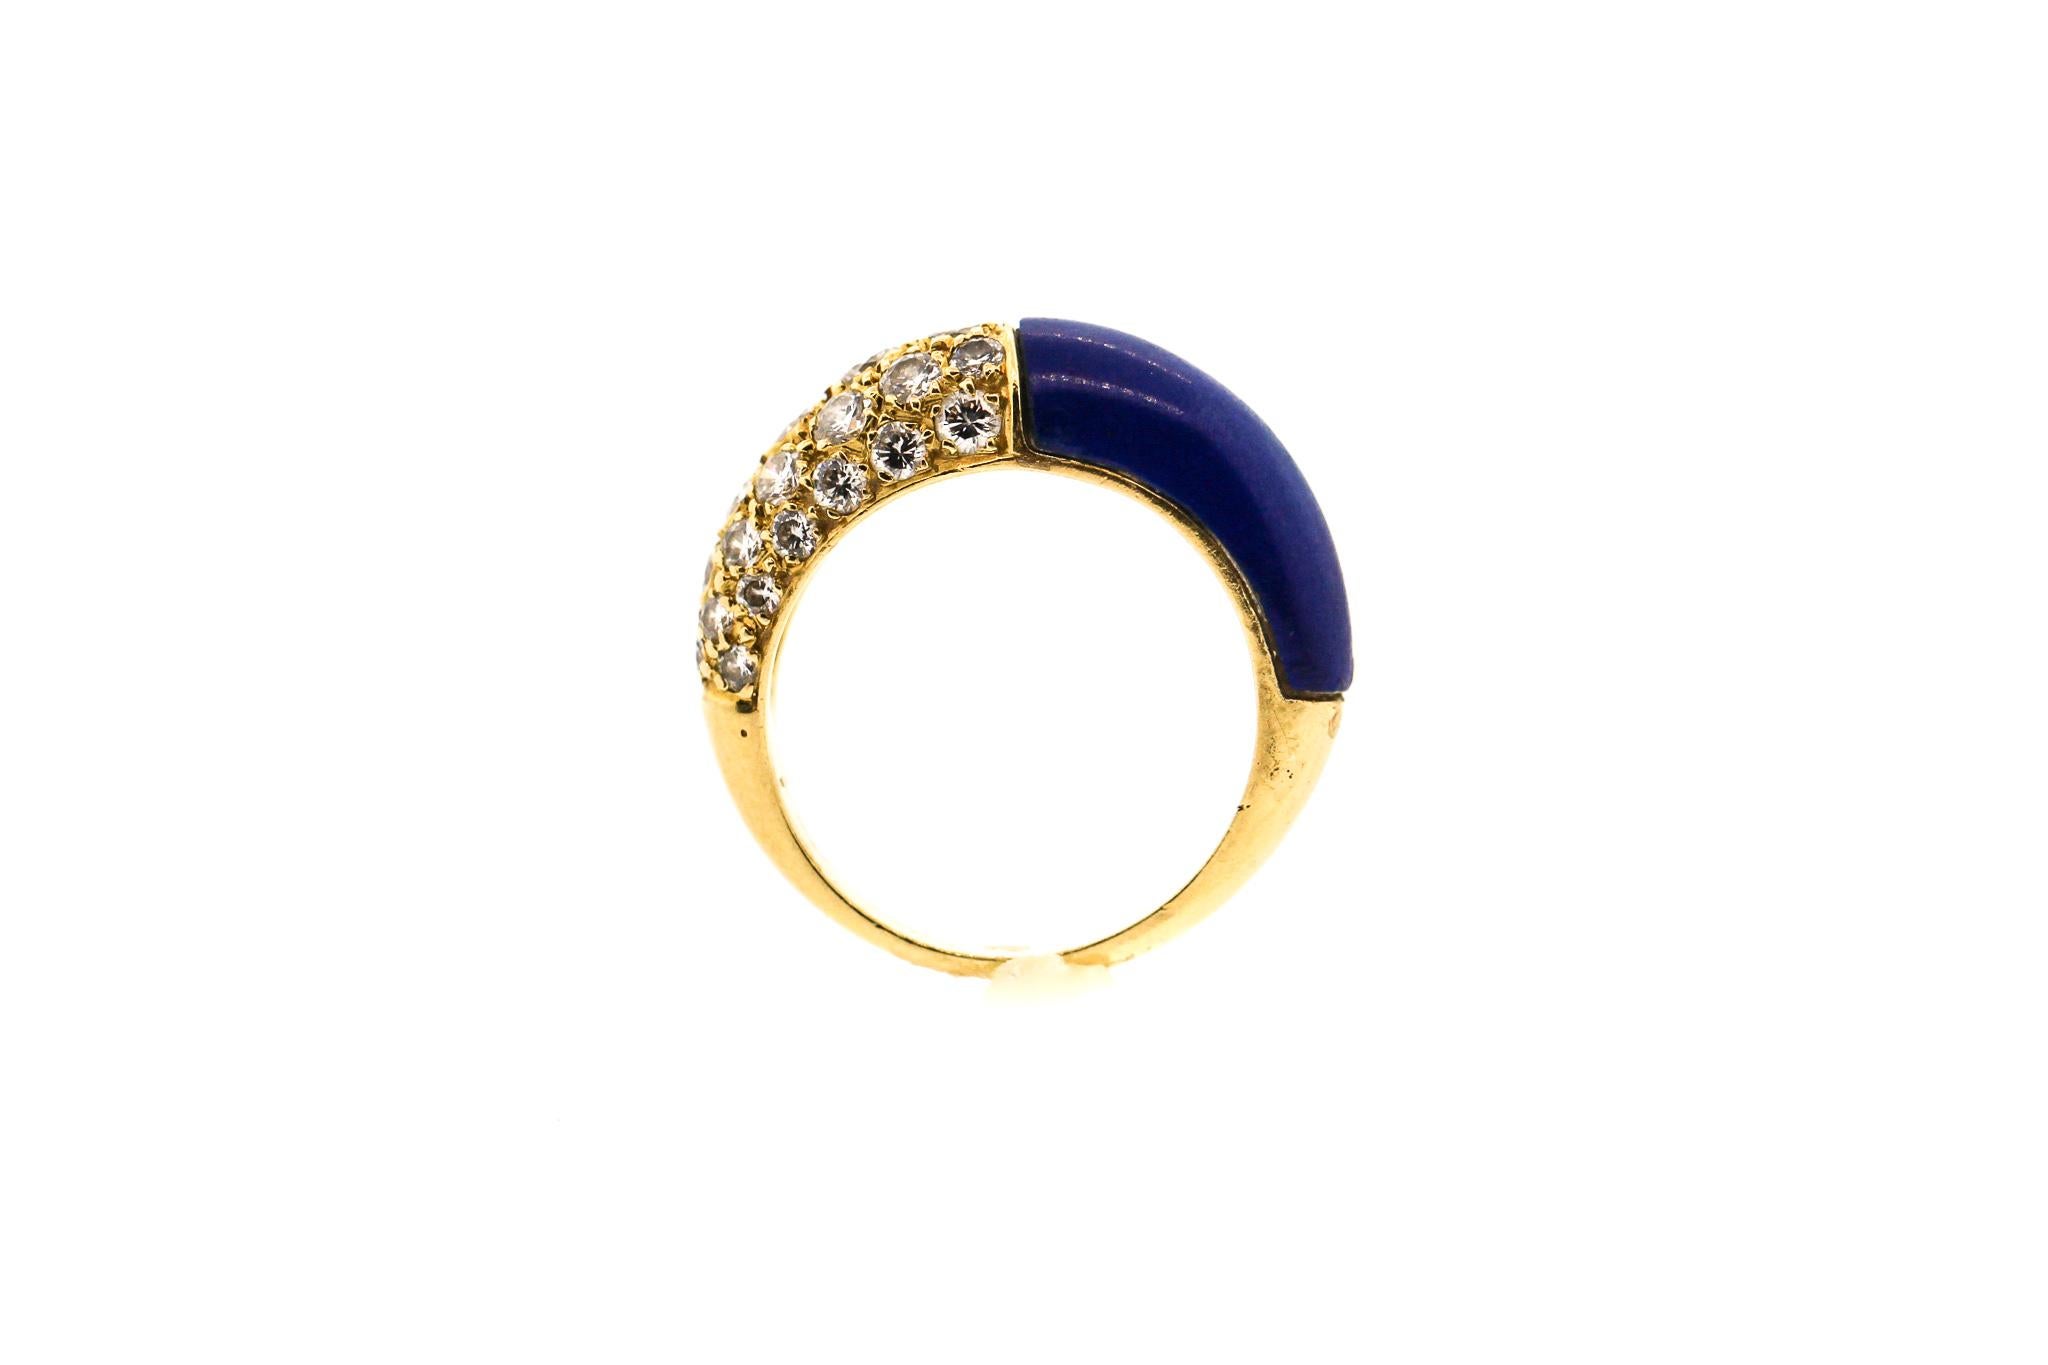 Vintage 18k Gold lapis and diamond ring by Cartier circa 1970. The lapis and the diamonds oppose each other on the finger. One side is set with 30 modern round brilliant diamonds weighing about 1.20 cts total. The ring is slightly domed and would